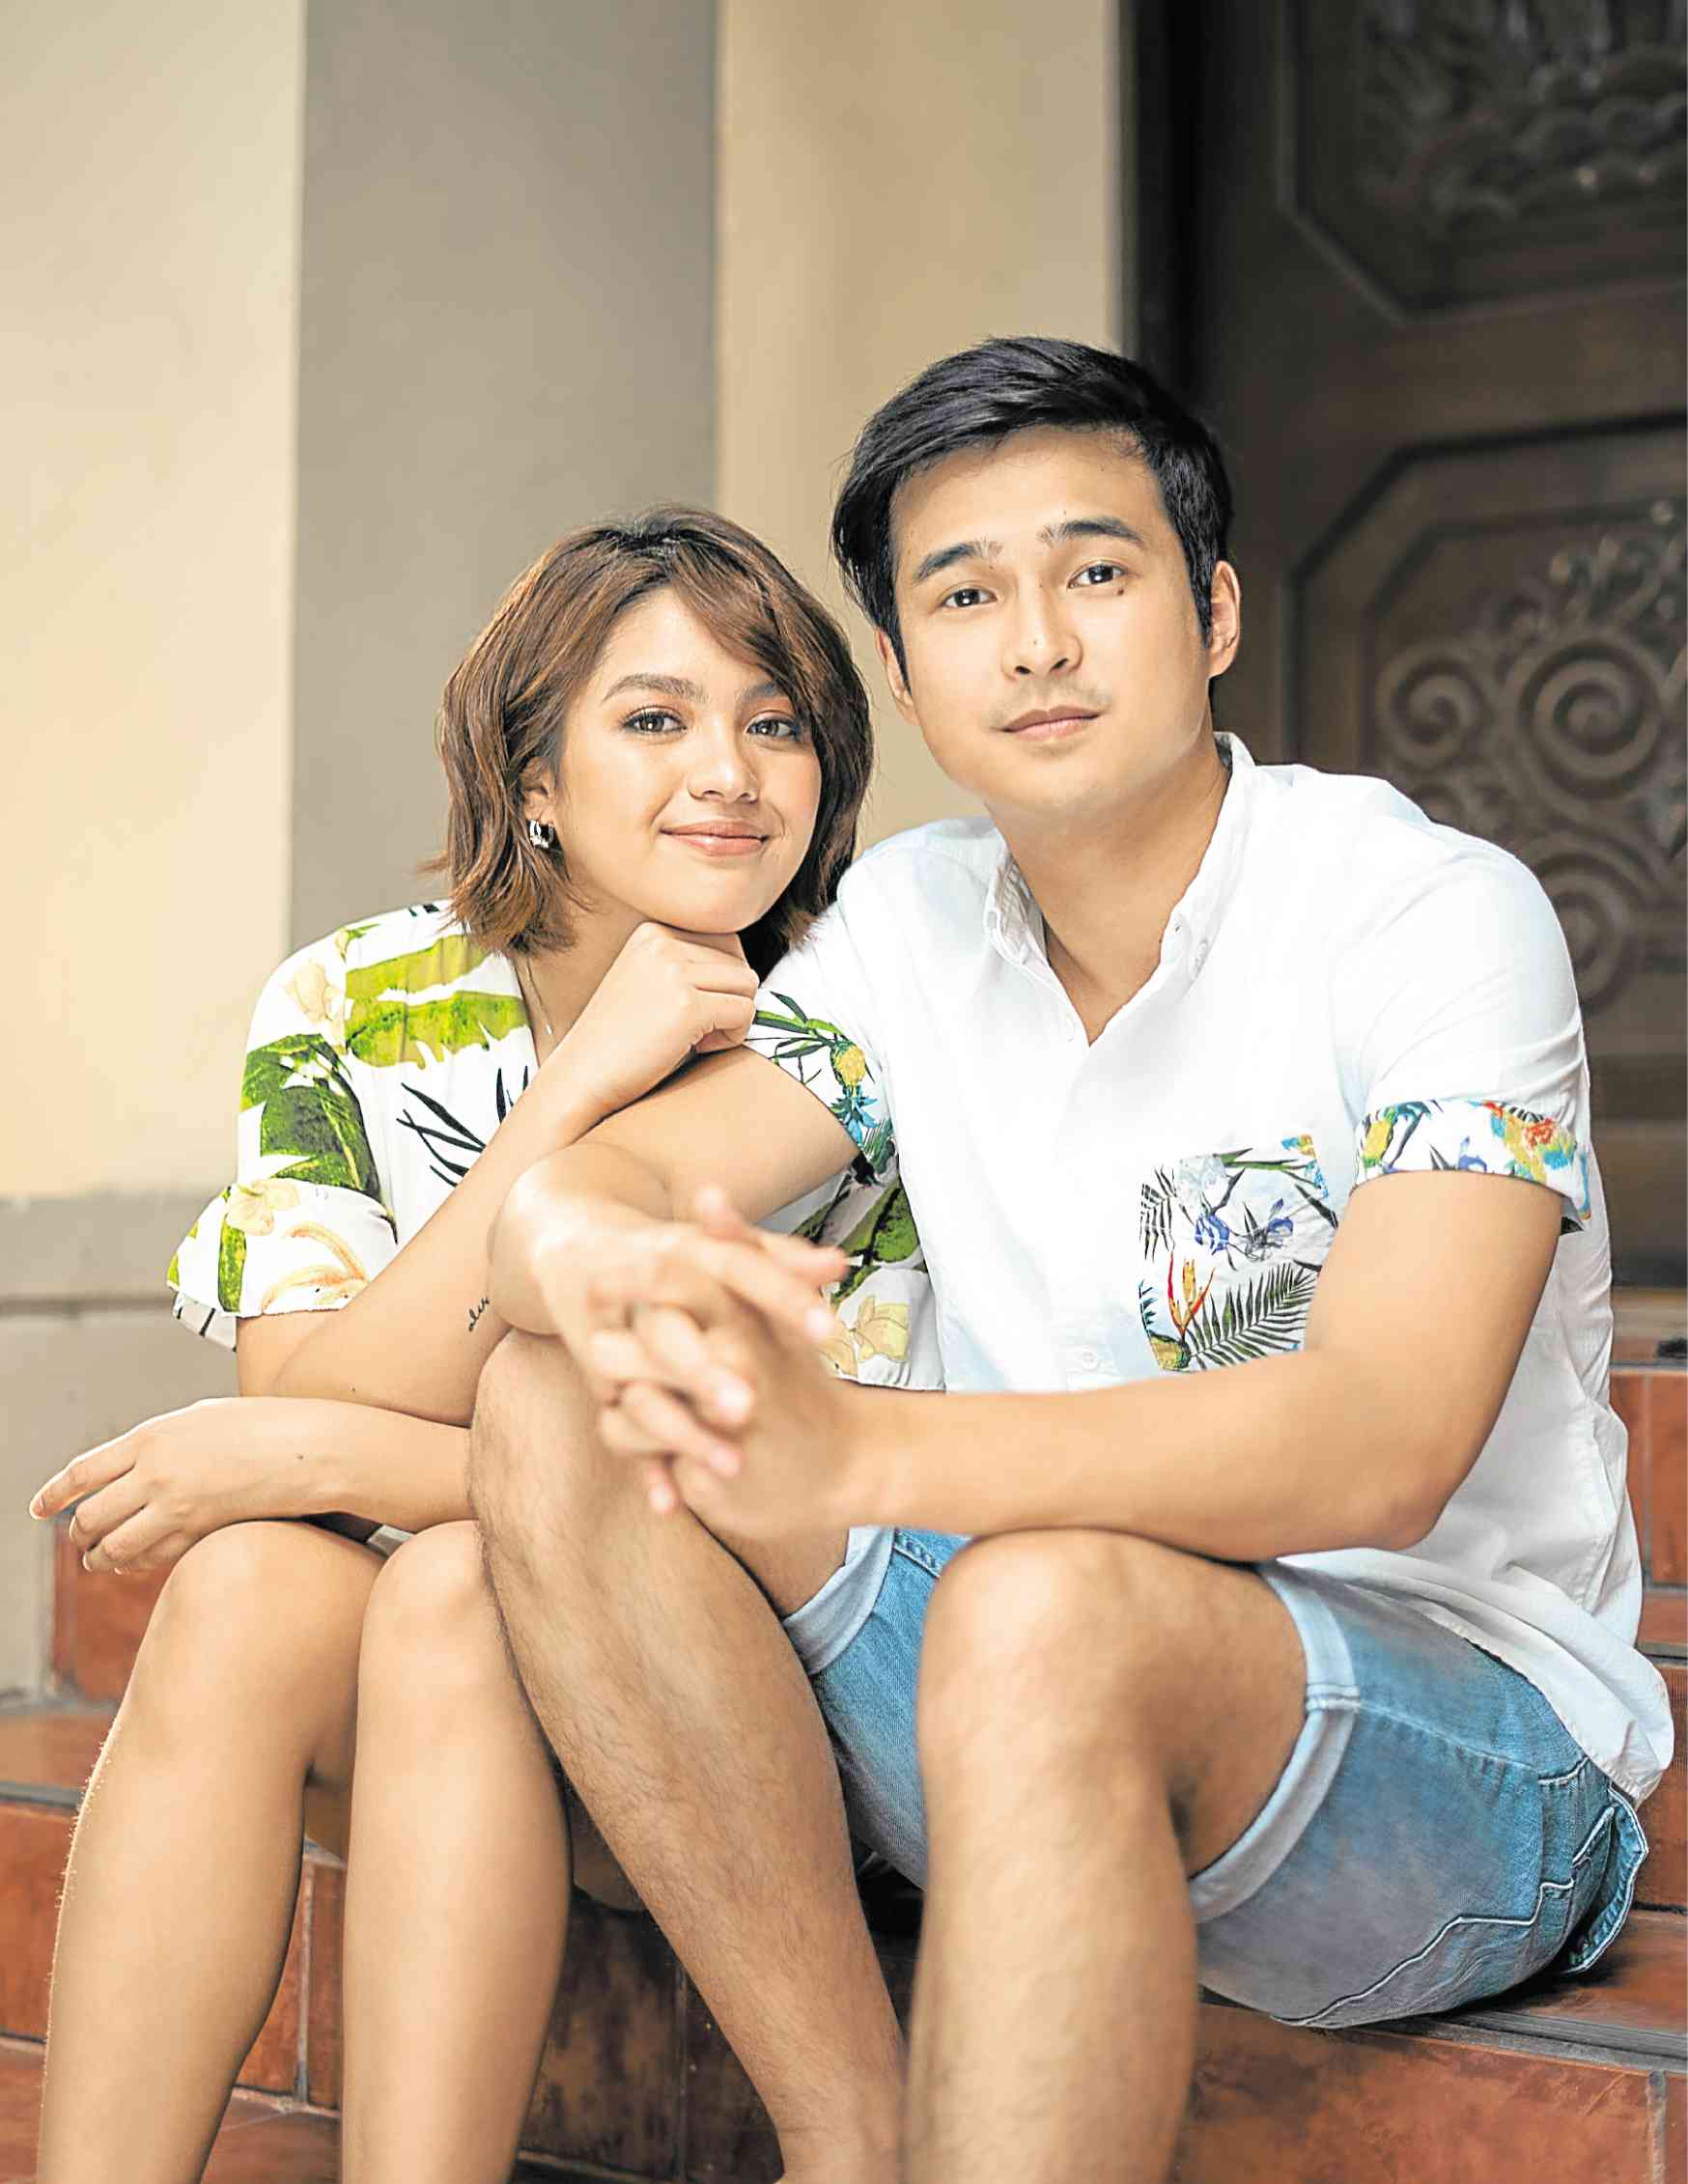 Jerome Ponce feeling contented after finally finding himself Inquirer